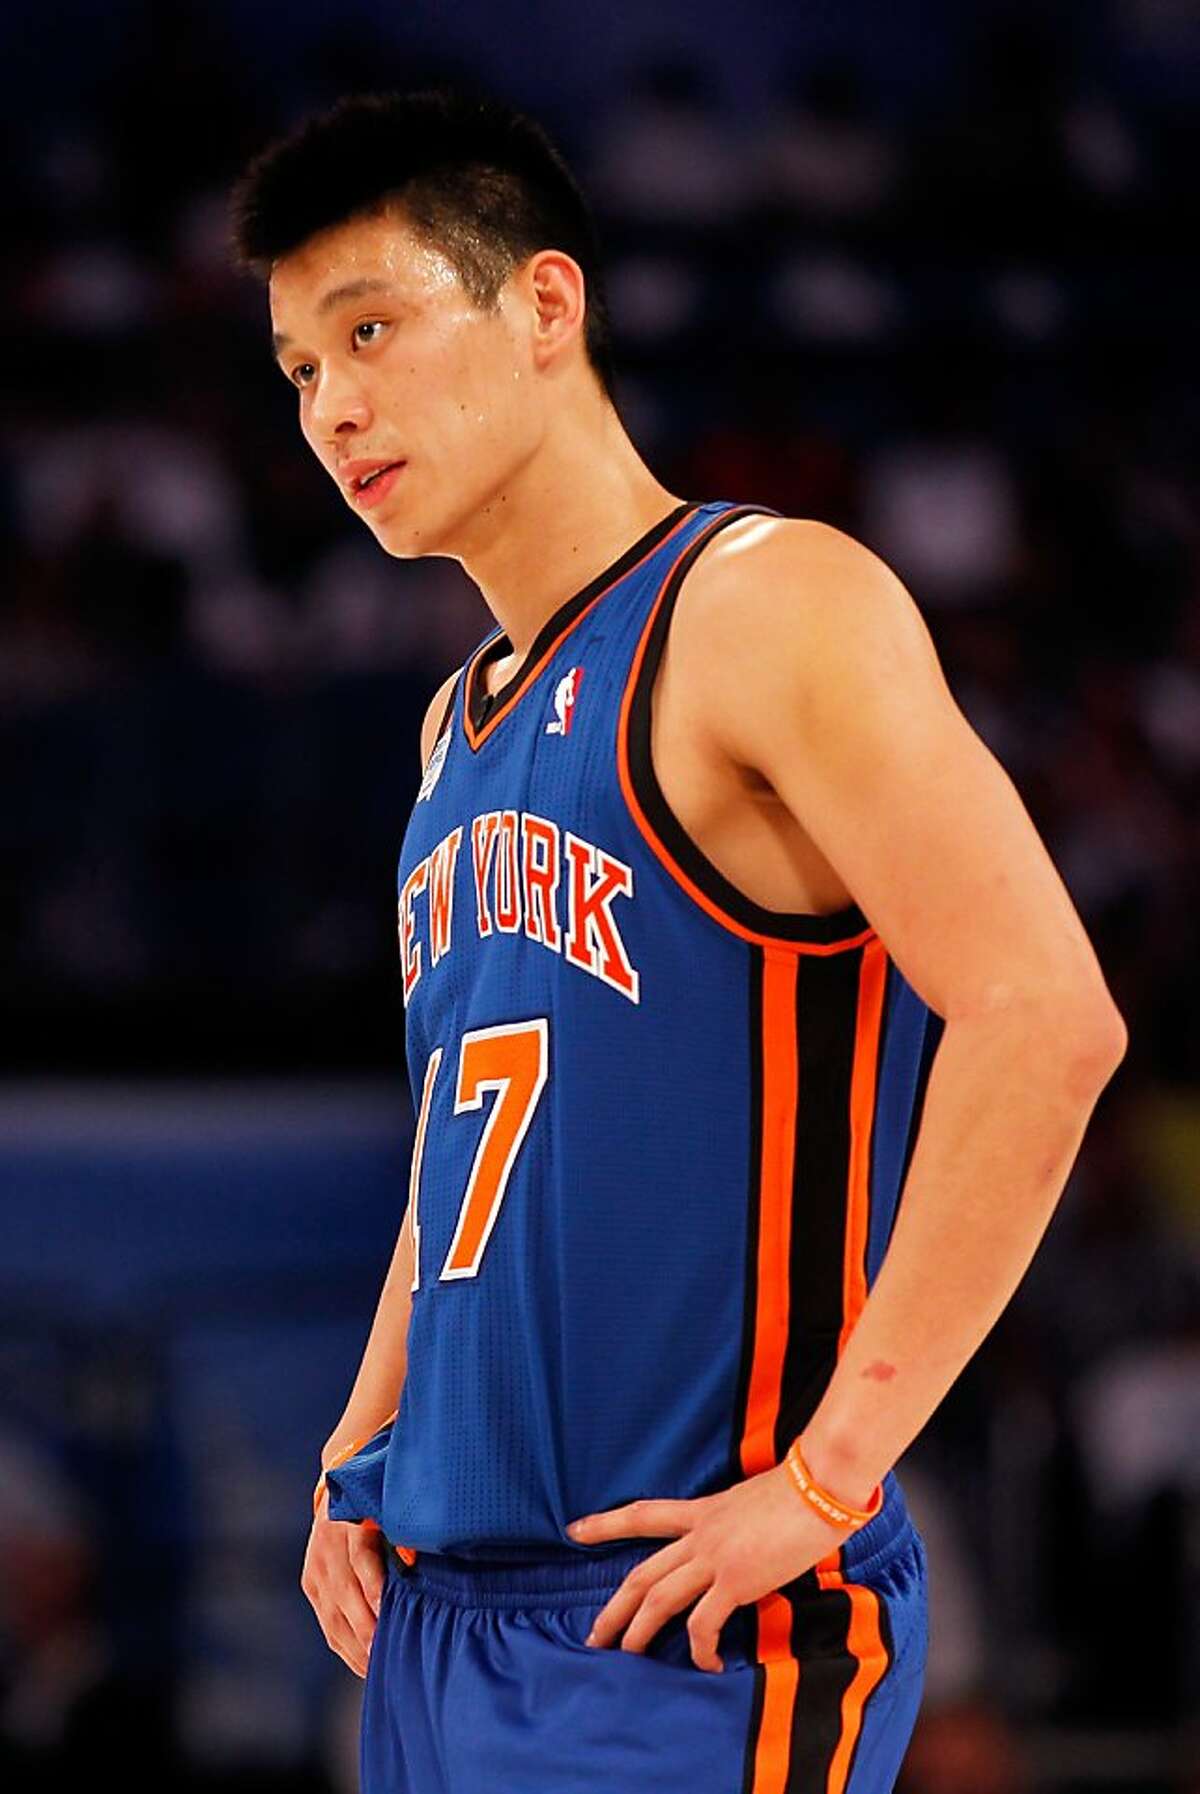 FILE - JULY 17: According to reports July 17, 2012, the negotiations between Jeremy Lin and the New York Knicks has ended and he is expected to sign with the Houston Rockets. ORLANDO, FL - FEBRUARY 24: Jeremy Lin #17 of the New York Knicks and Team Shaq looks on during the BBVA Rising Stars Challenge part of the 2012 NBA All-Star Weekend at Amway Center on February 24, 2012 in Orlando, Florida. NOTE TO USER: User expressly acknowledges and agrees that, by downloading and or using this photograph, User is consenting to the terms and conditions of the Getty Images License Agreement. (Photo by Mike Ehrmann/Getty Images)